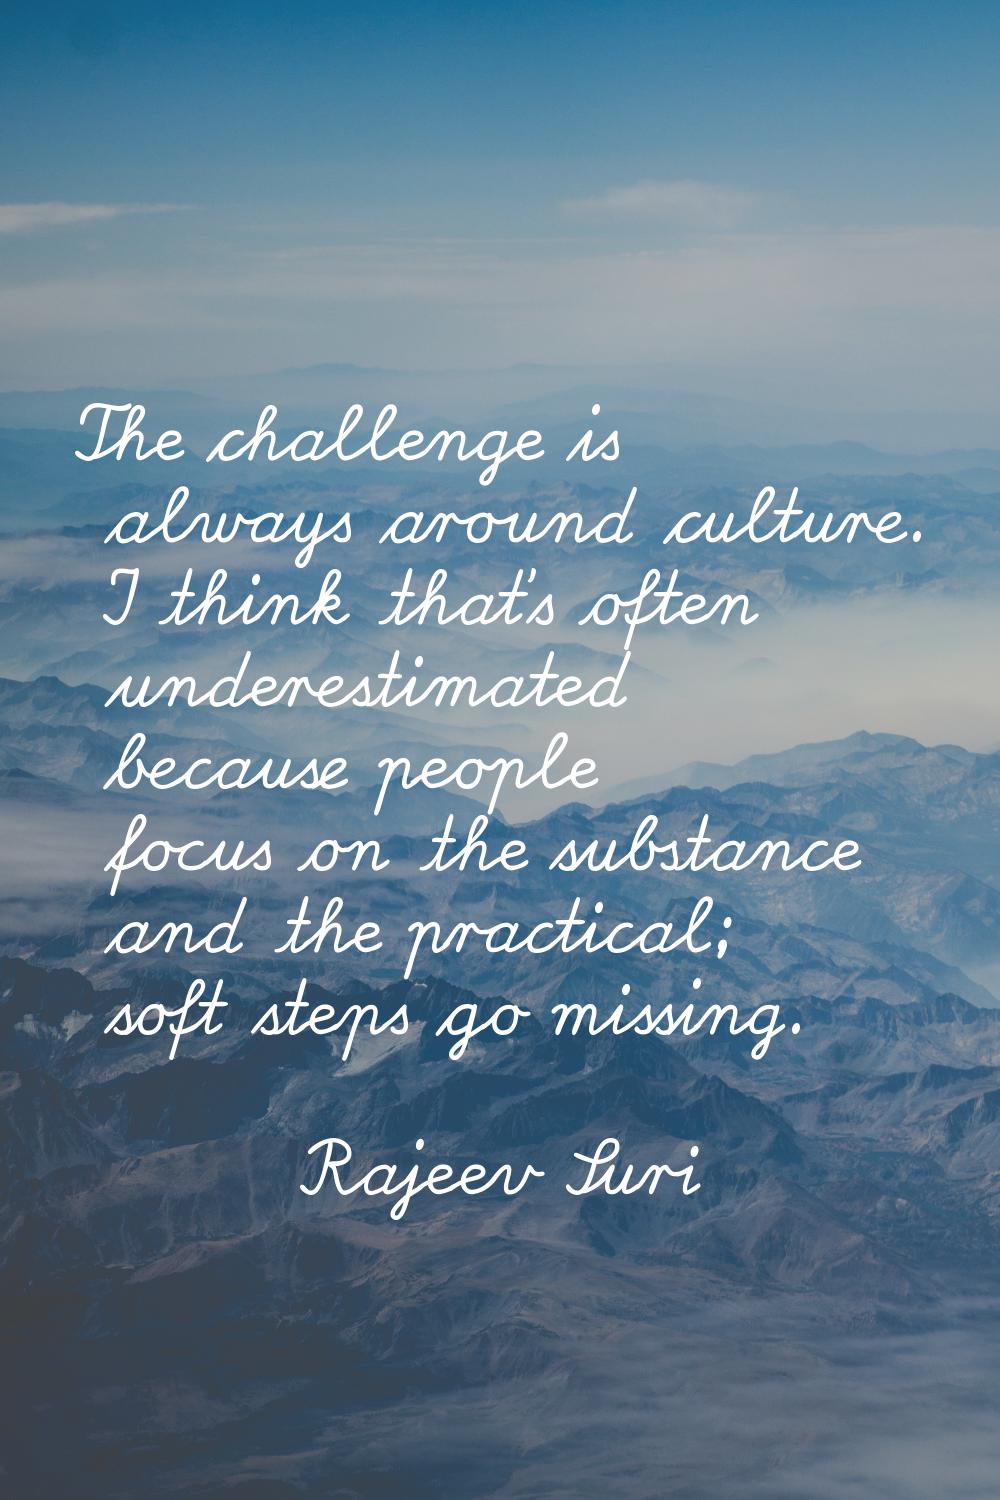 The challenge is always around culture. I think that's often underestimated because people focus on